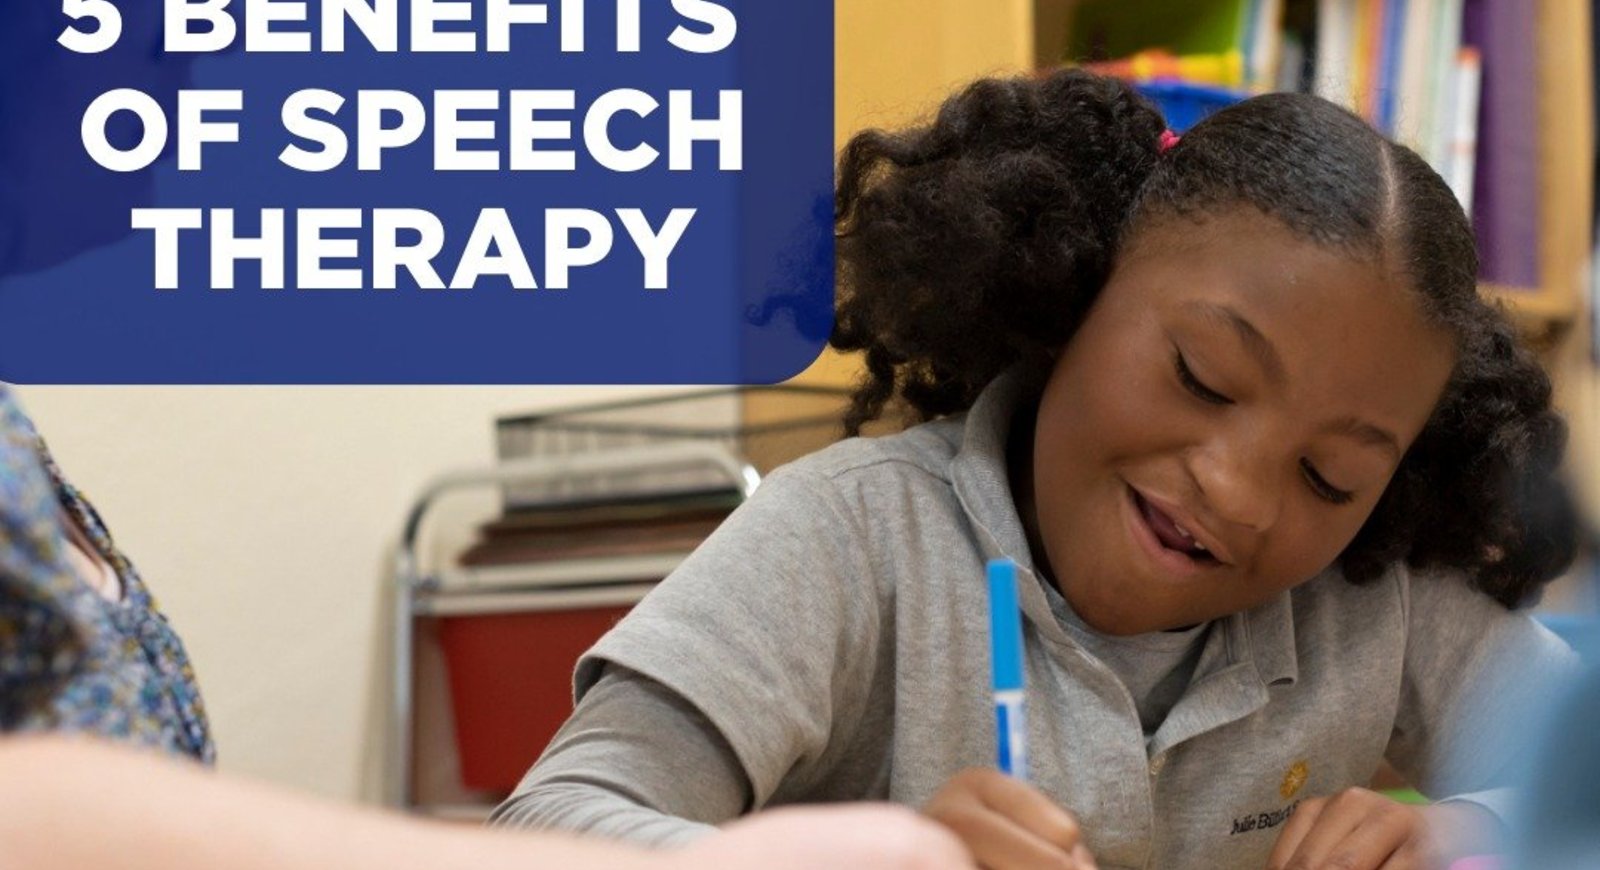 5-benefits-of-speech-therapy